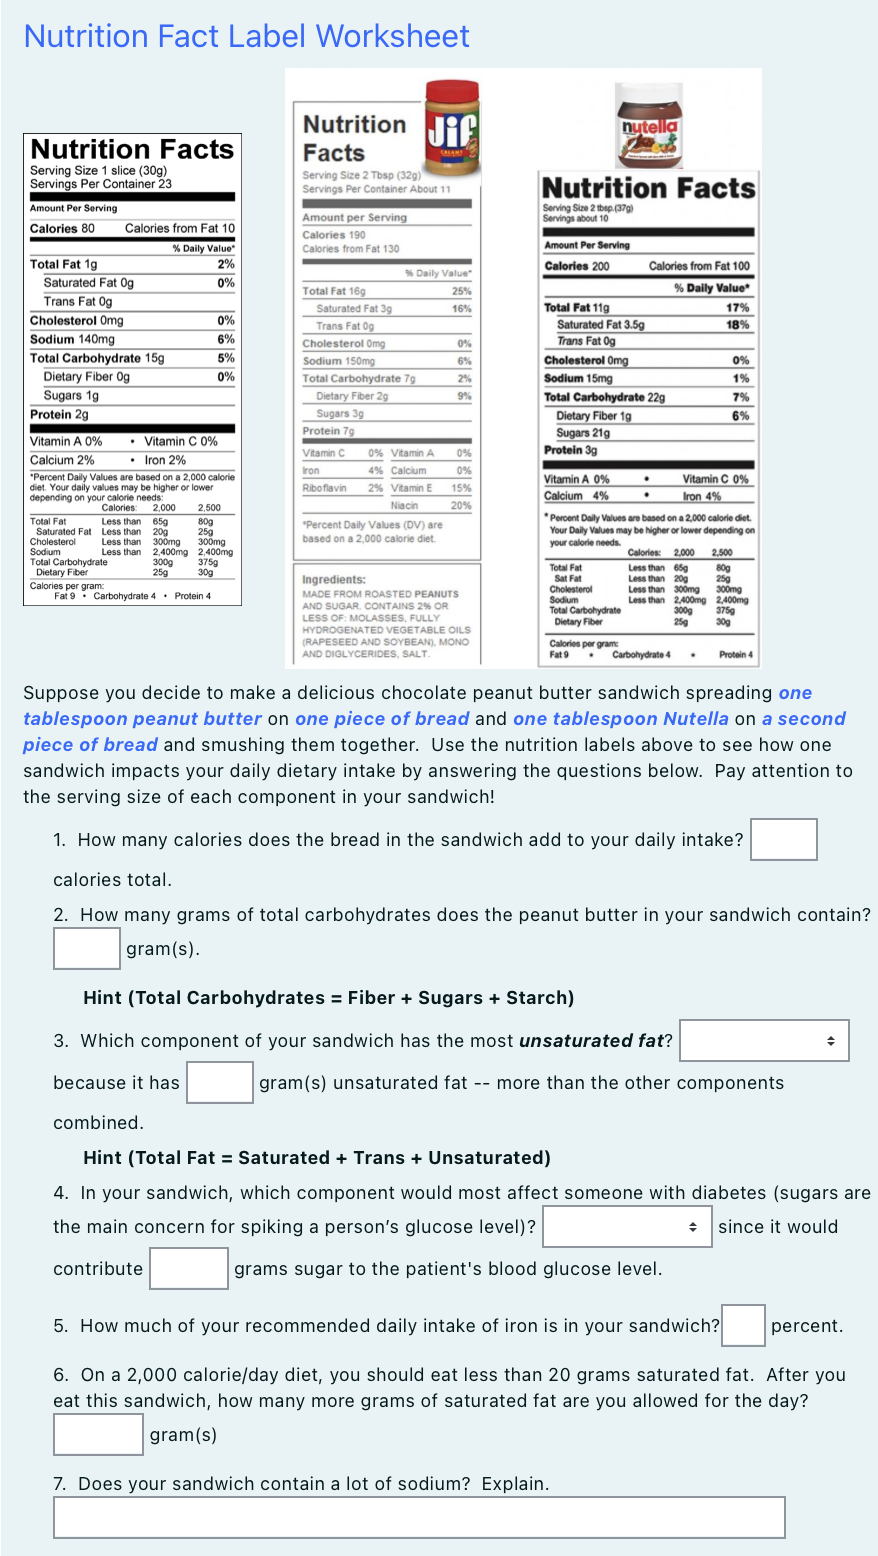 Solved Nutrition Fact Label Worksheet Nutrition Jif Facts  Chegg.com For Nutrition Label Worksheet Answers